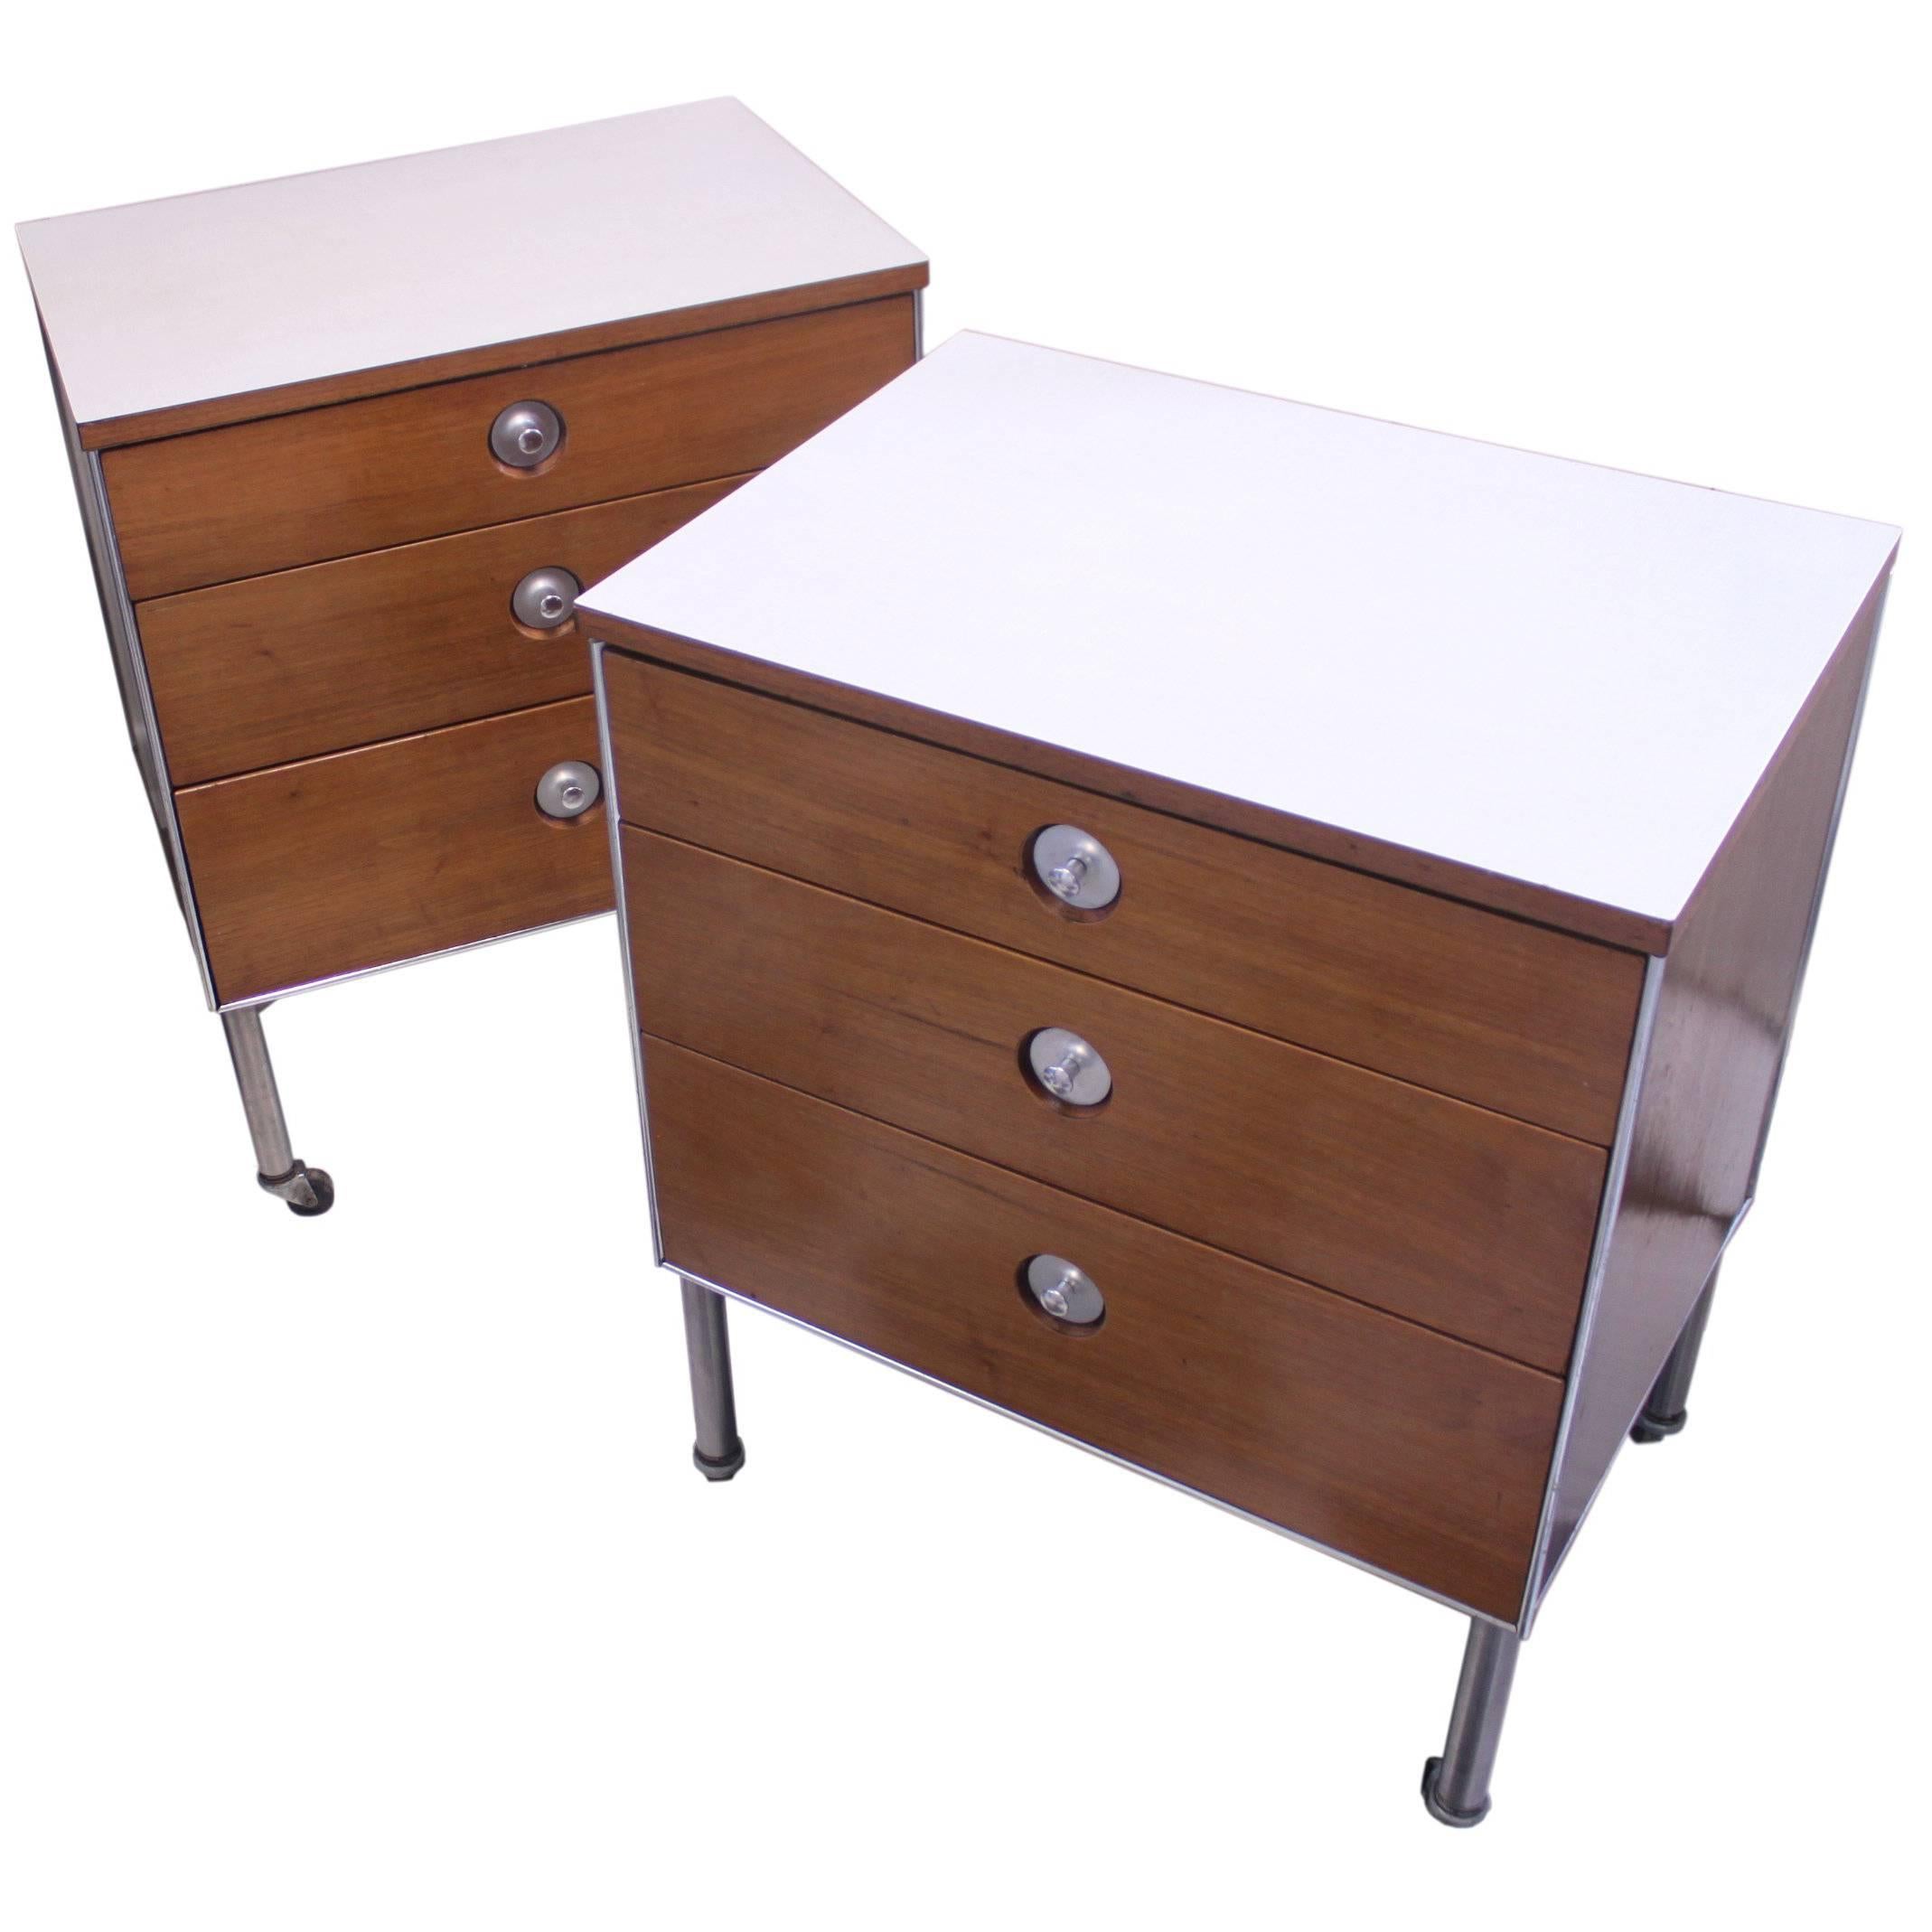 Pair of Mid-Century Modern End Table or Night Stands by Raymond Loewy